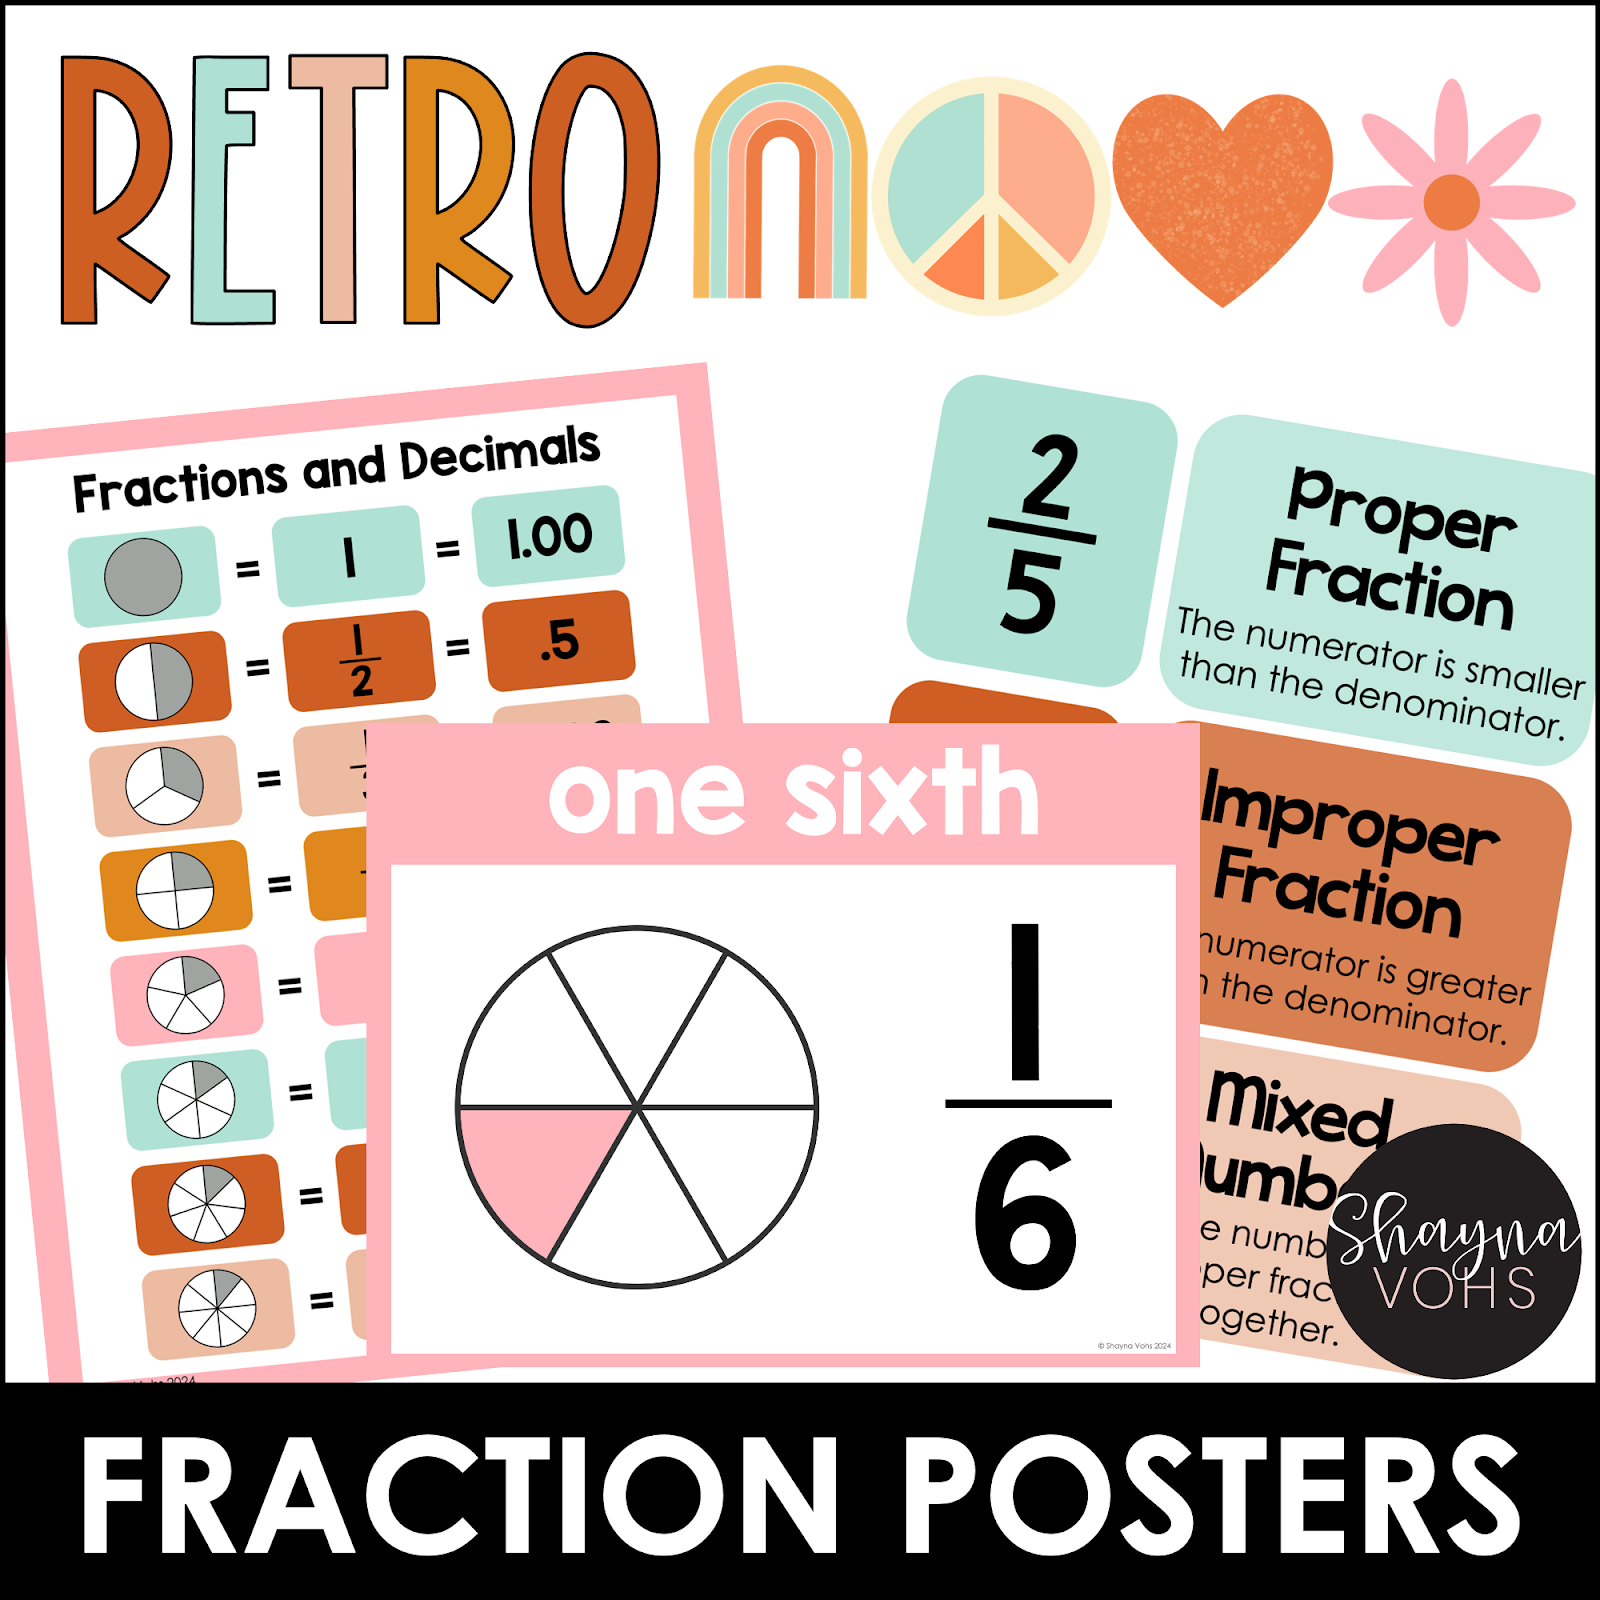 This image shows fraction posters in a Retro color scheme. 